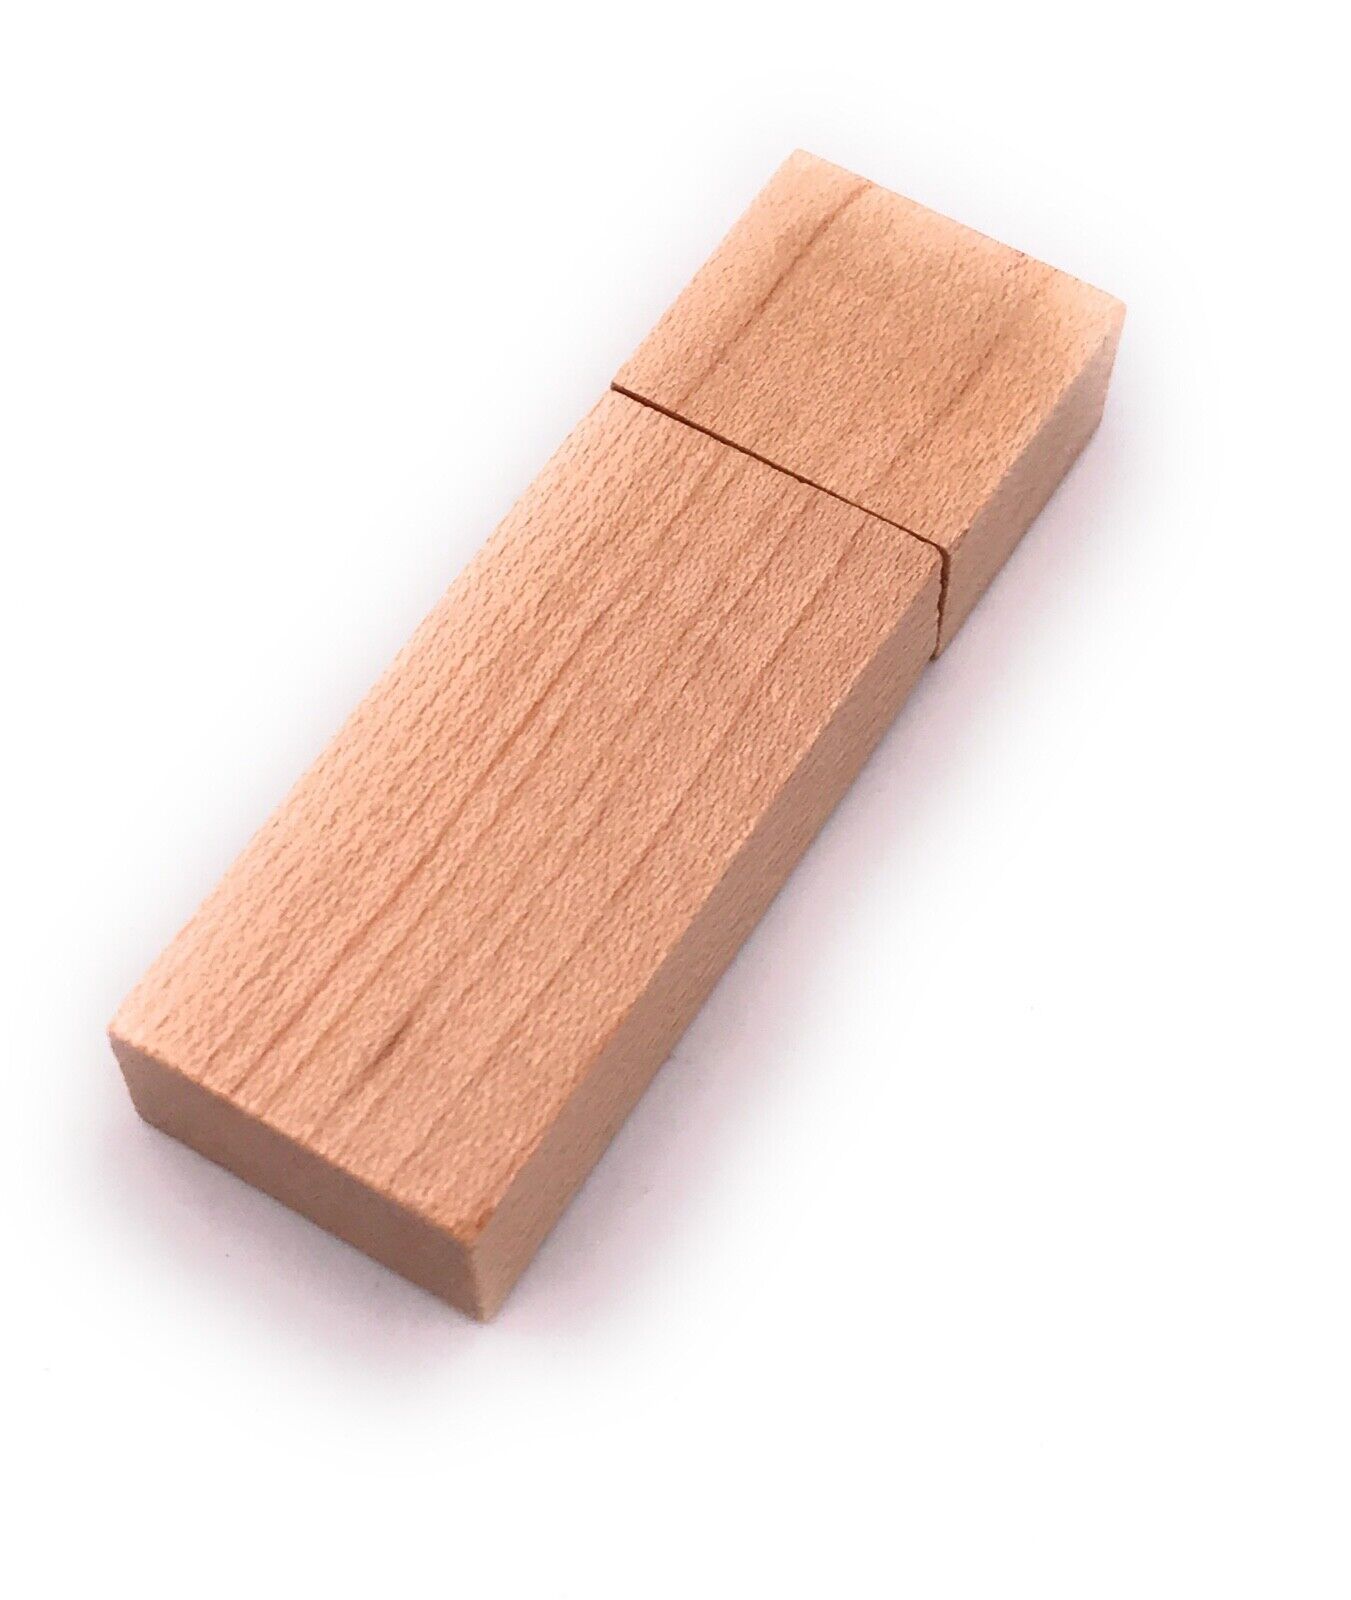 Wooden Box Pluggable Magnetic Funny USB Stick Div HD